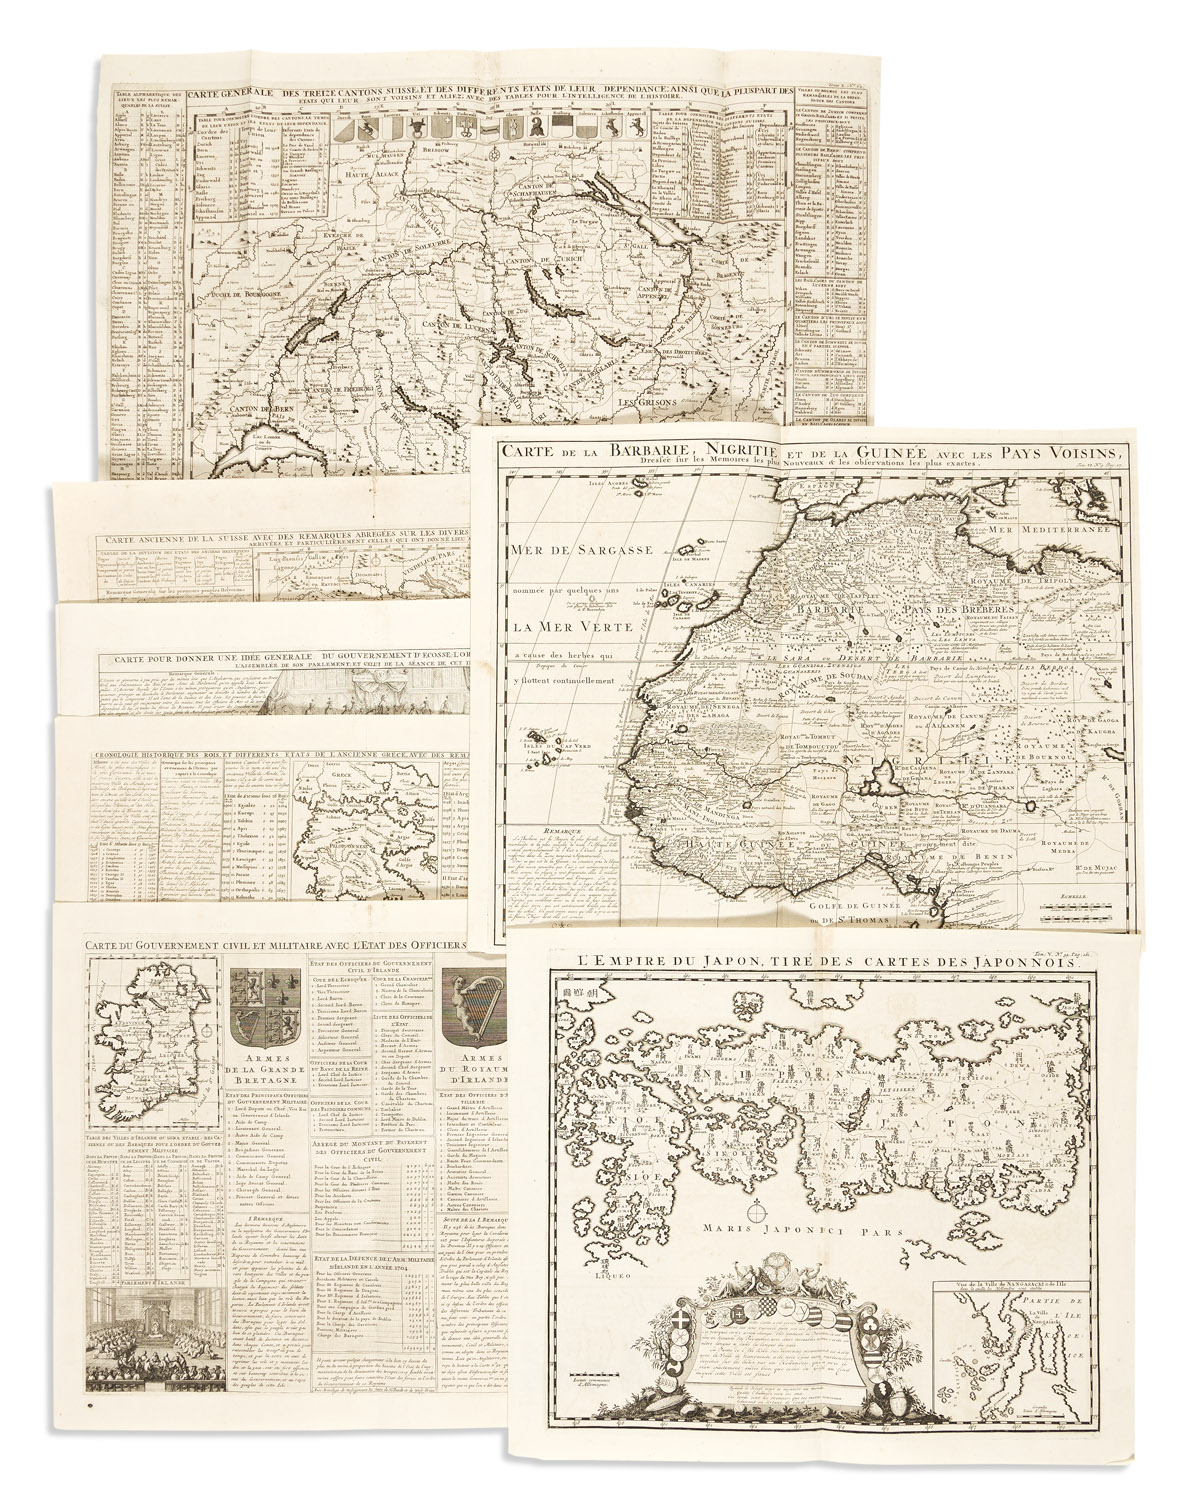 CHATELAIN, HENRI. Group of 9 double-page or folding engraved maps, mapsheets, and historical tables from Atlas Historique.